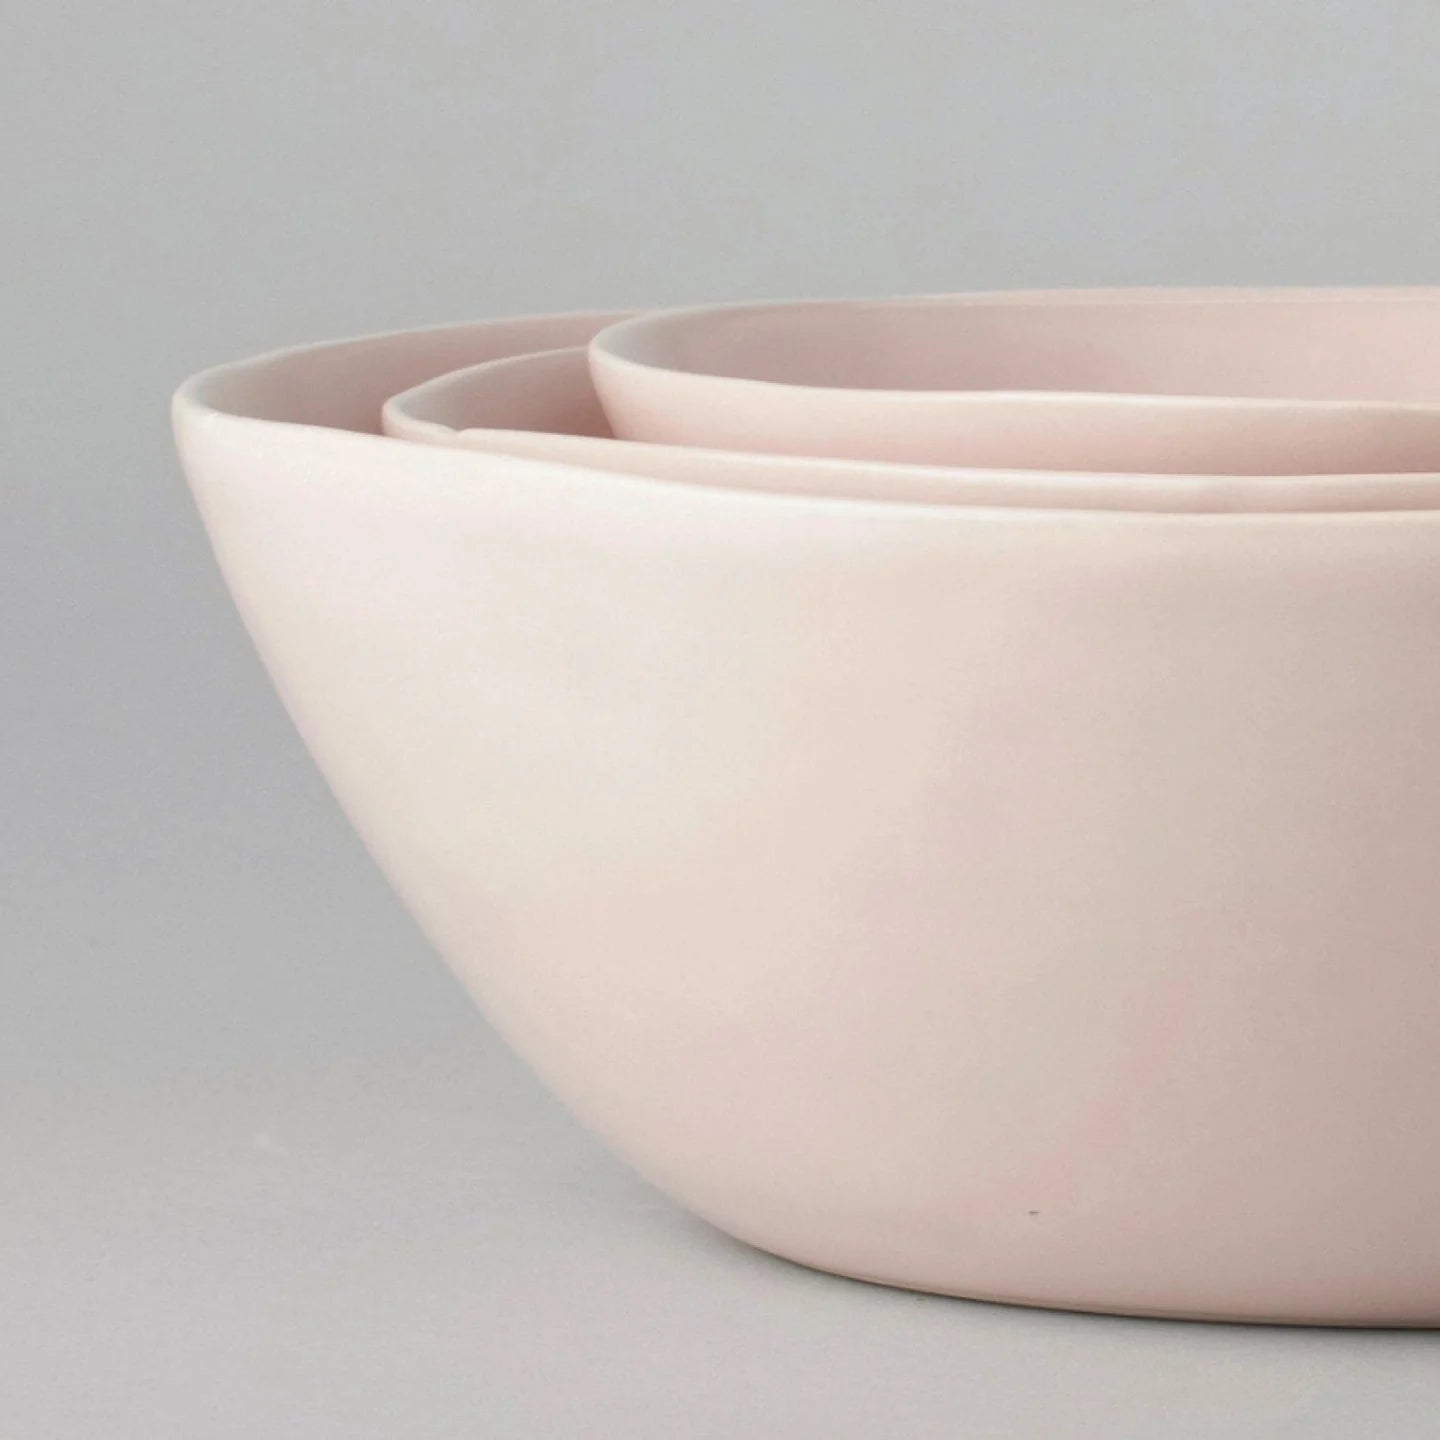 The Nested Serving Bowls - Blush Pink